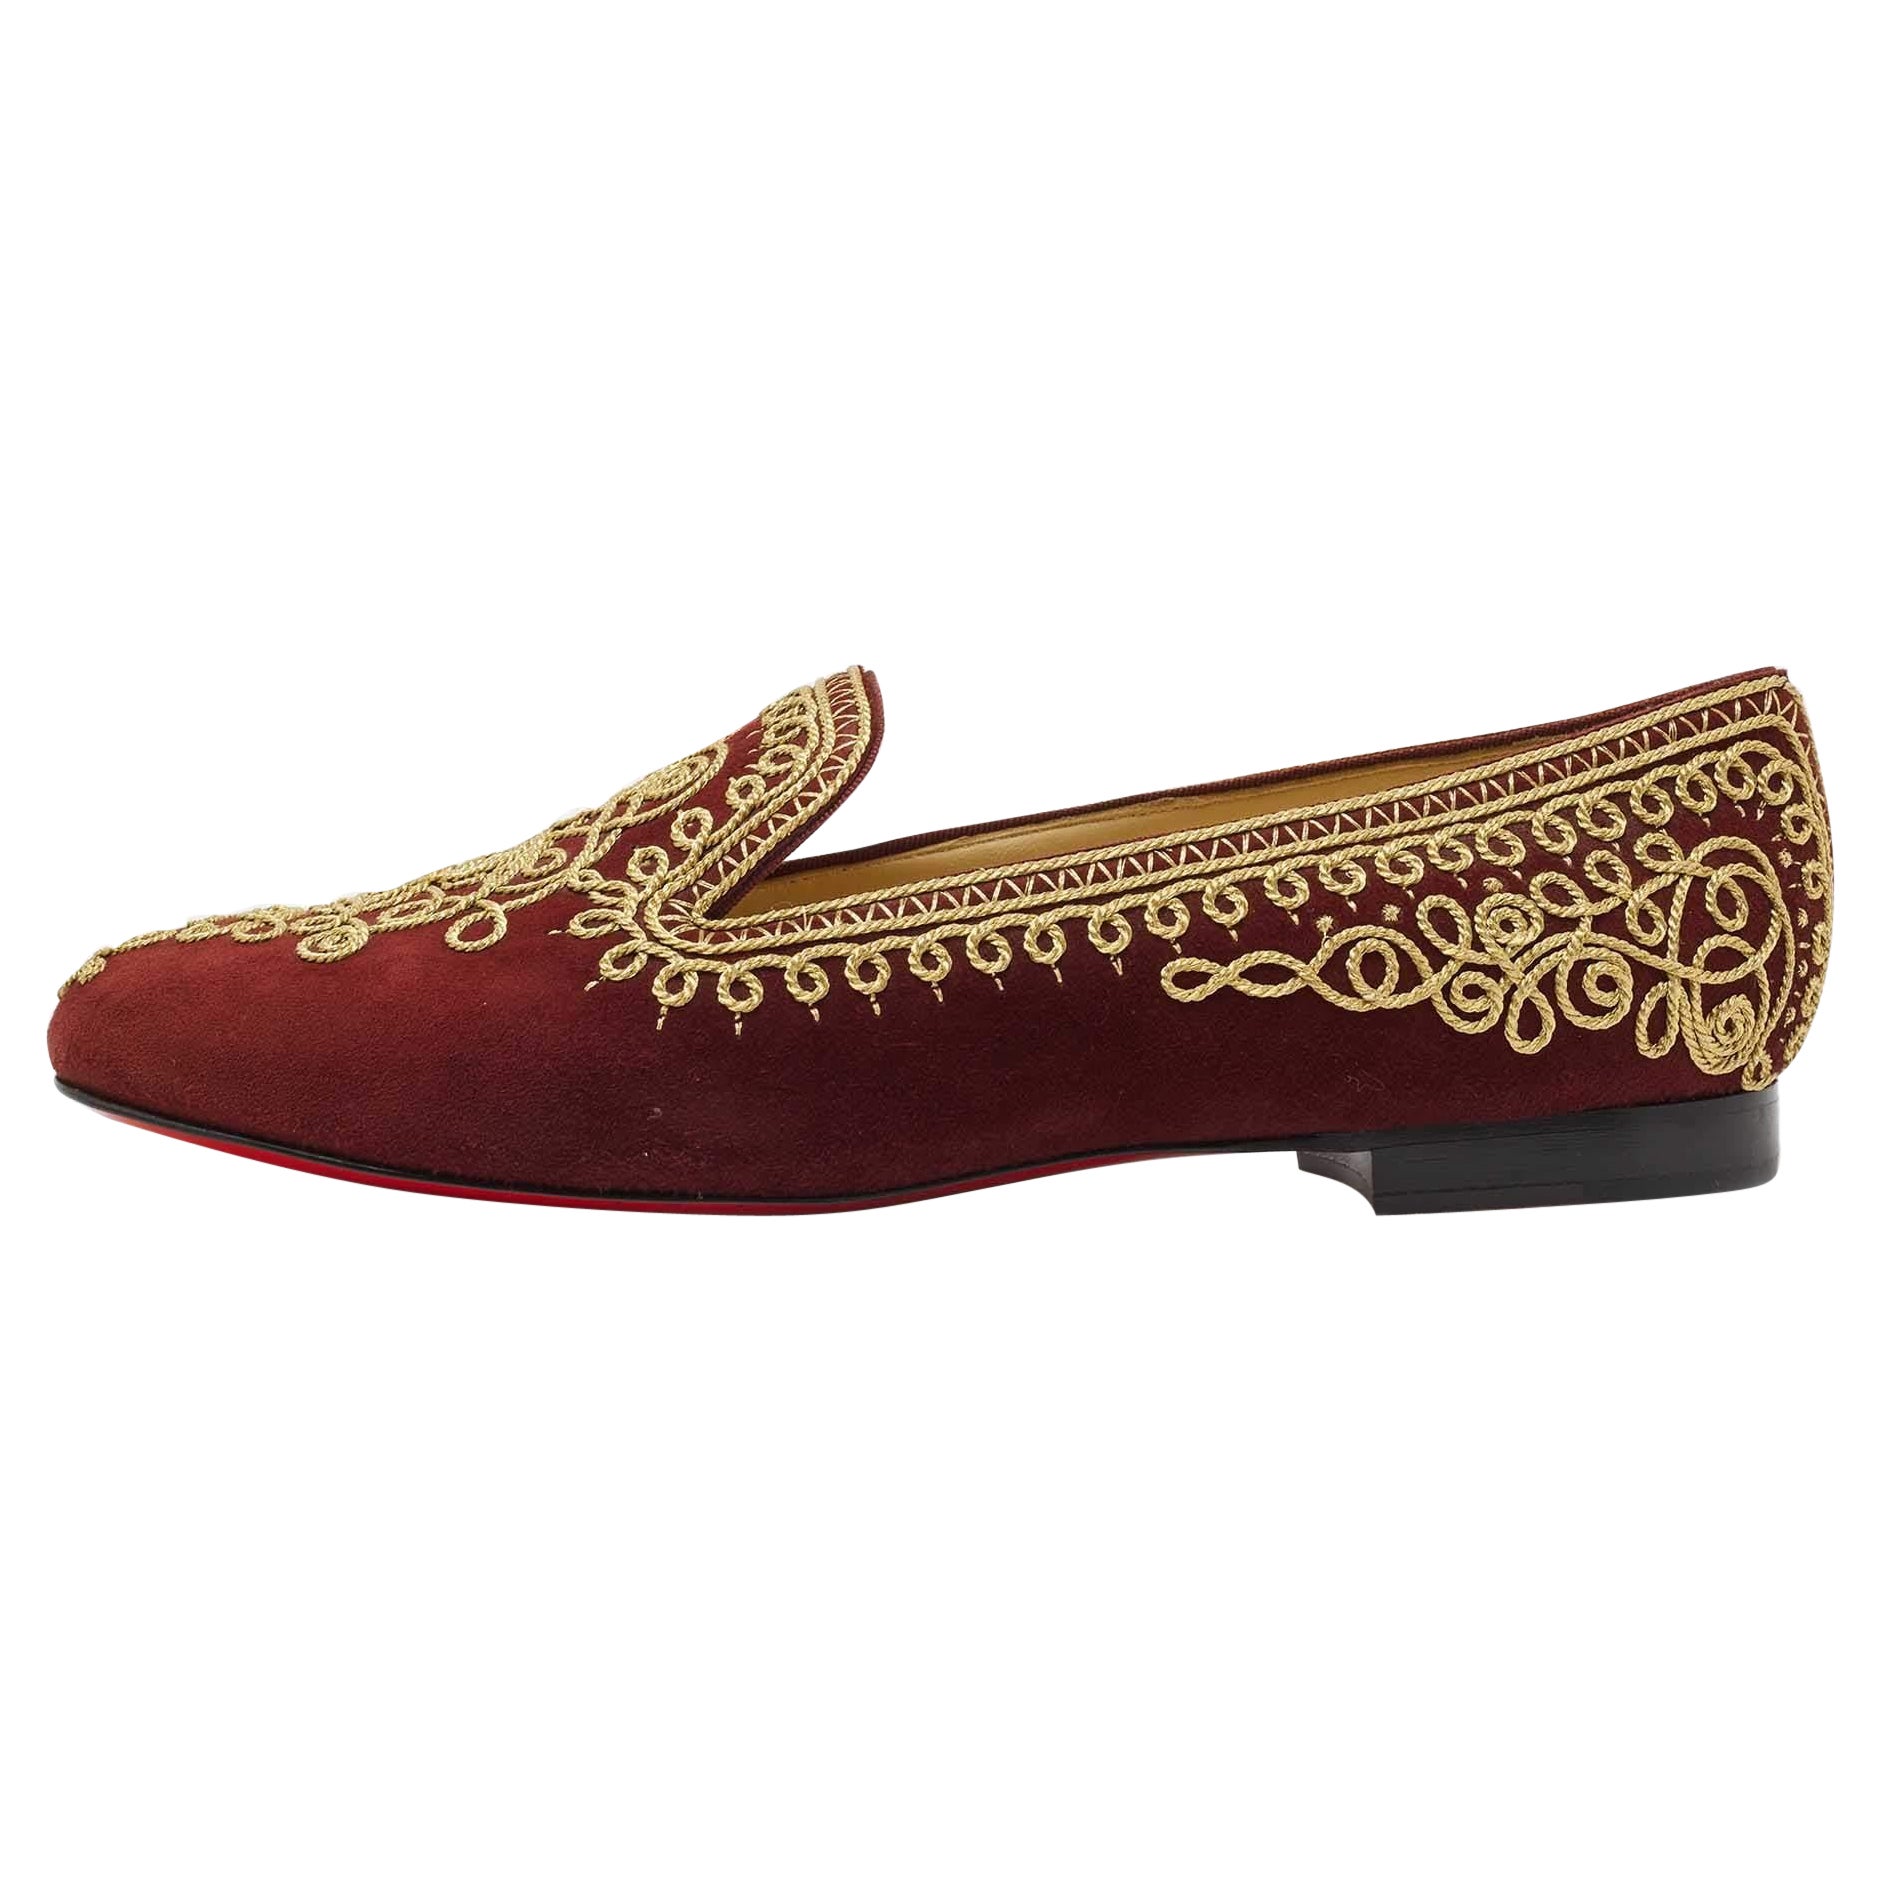 Christian Louboutin - Chaussures de smoking Mamounia brodées couleur bourgogne, taille 40,5